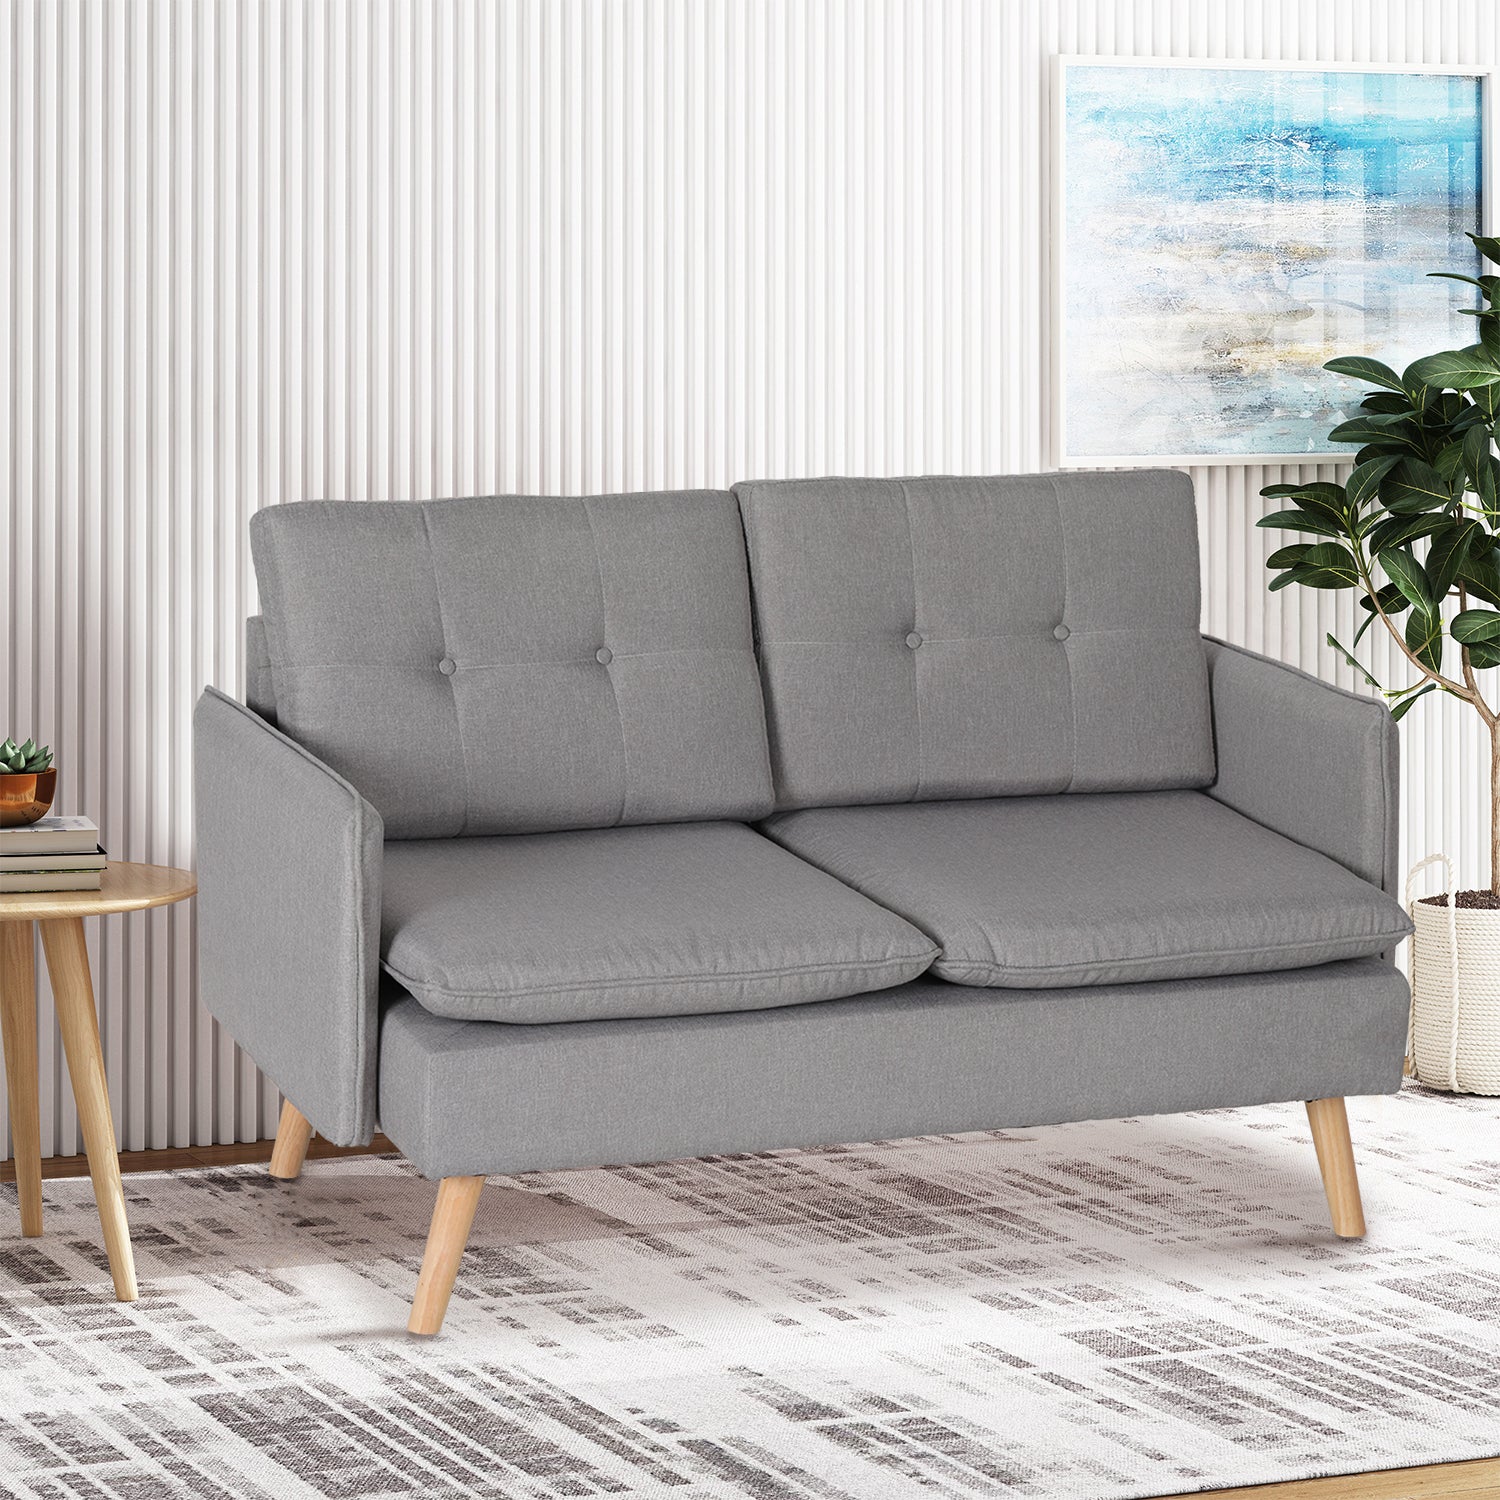 PHI VILLA Modern Couch Lounge Sofa Chair Loveseat with Wood Leg for Living Room